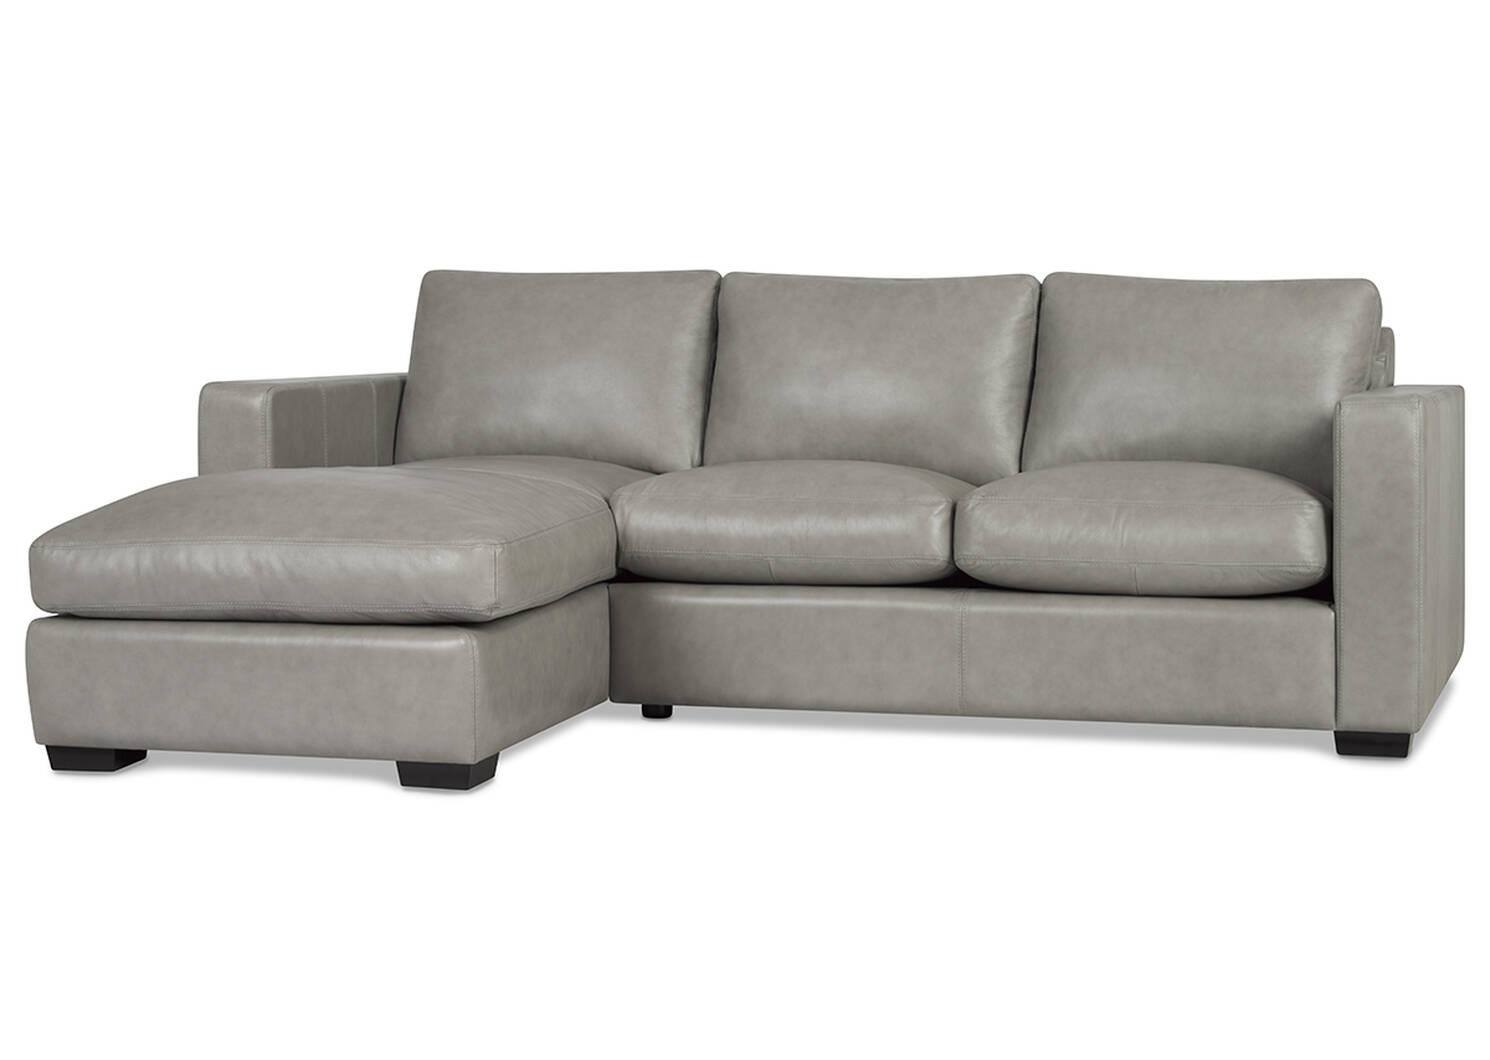 Brewer Custom Leather Sofa chaise